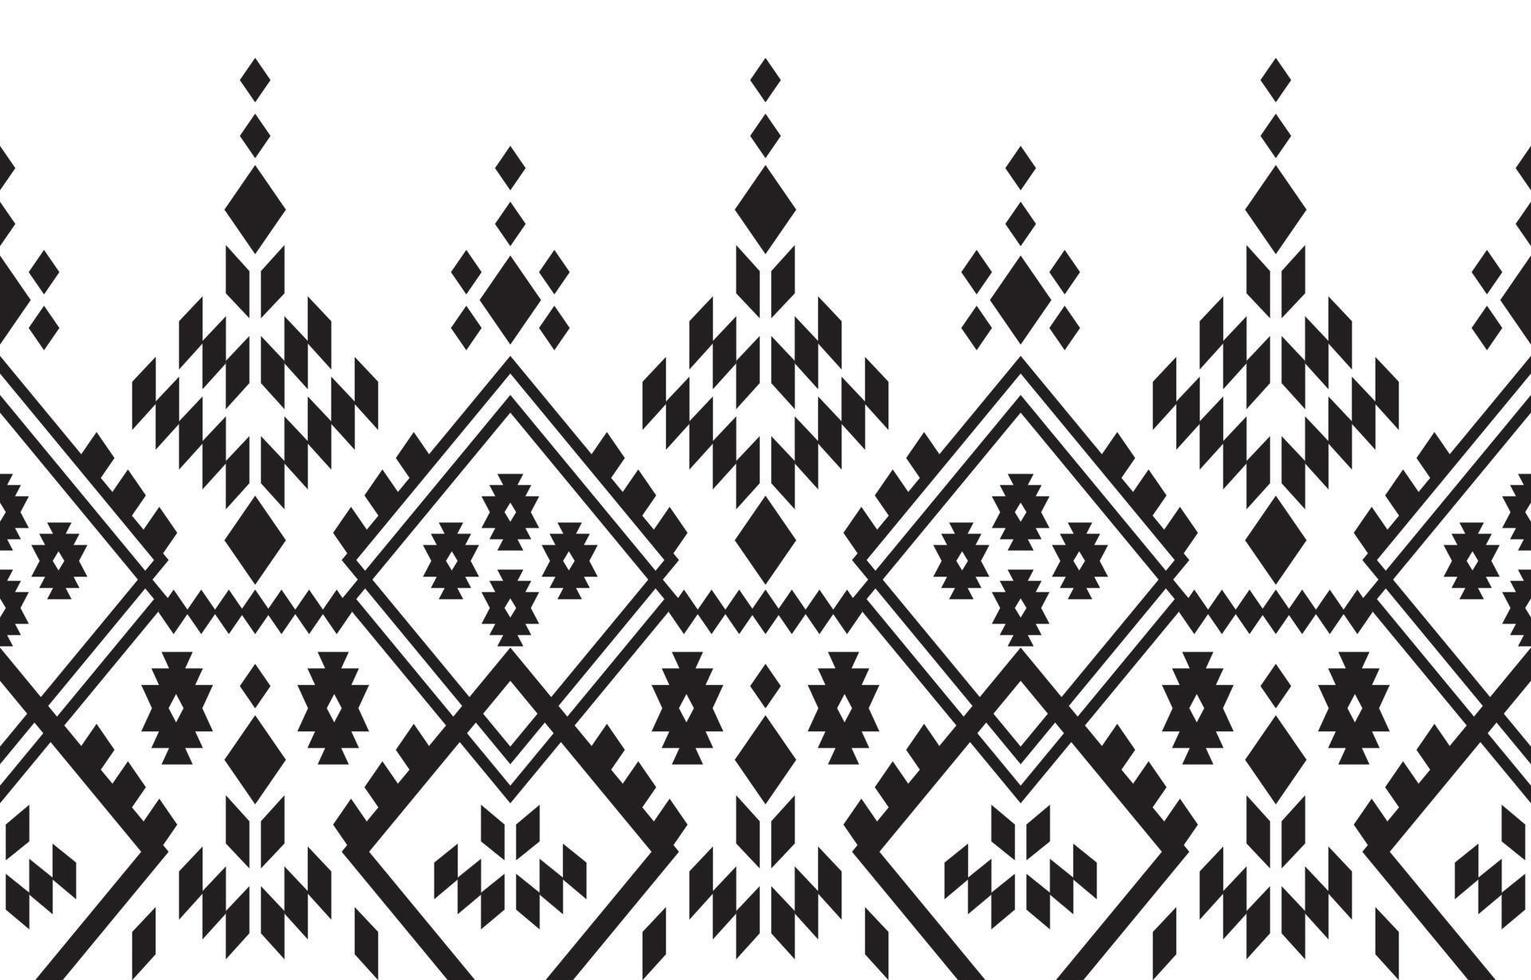 Beautiful Ethnic Aztec abstract Seamless pattern in tribal, folk embroidery, chevron art design. geometric art ornament print.Design for carpet, wallpaper, clothing, wrapping, fabric, cover vector